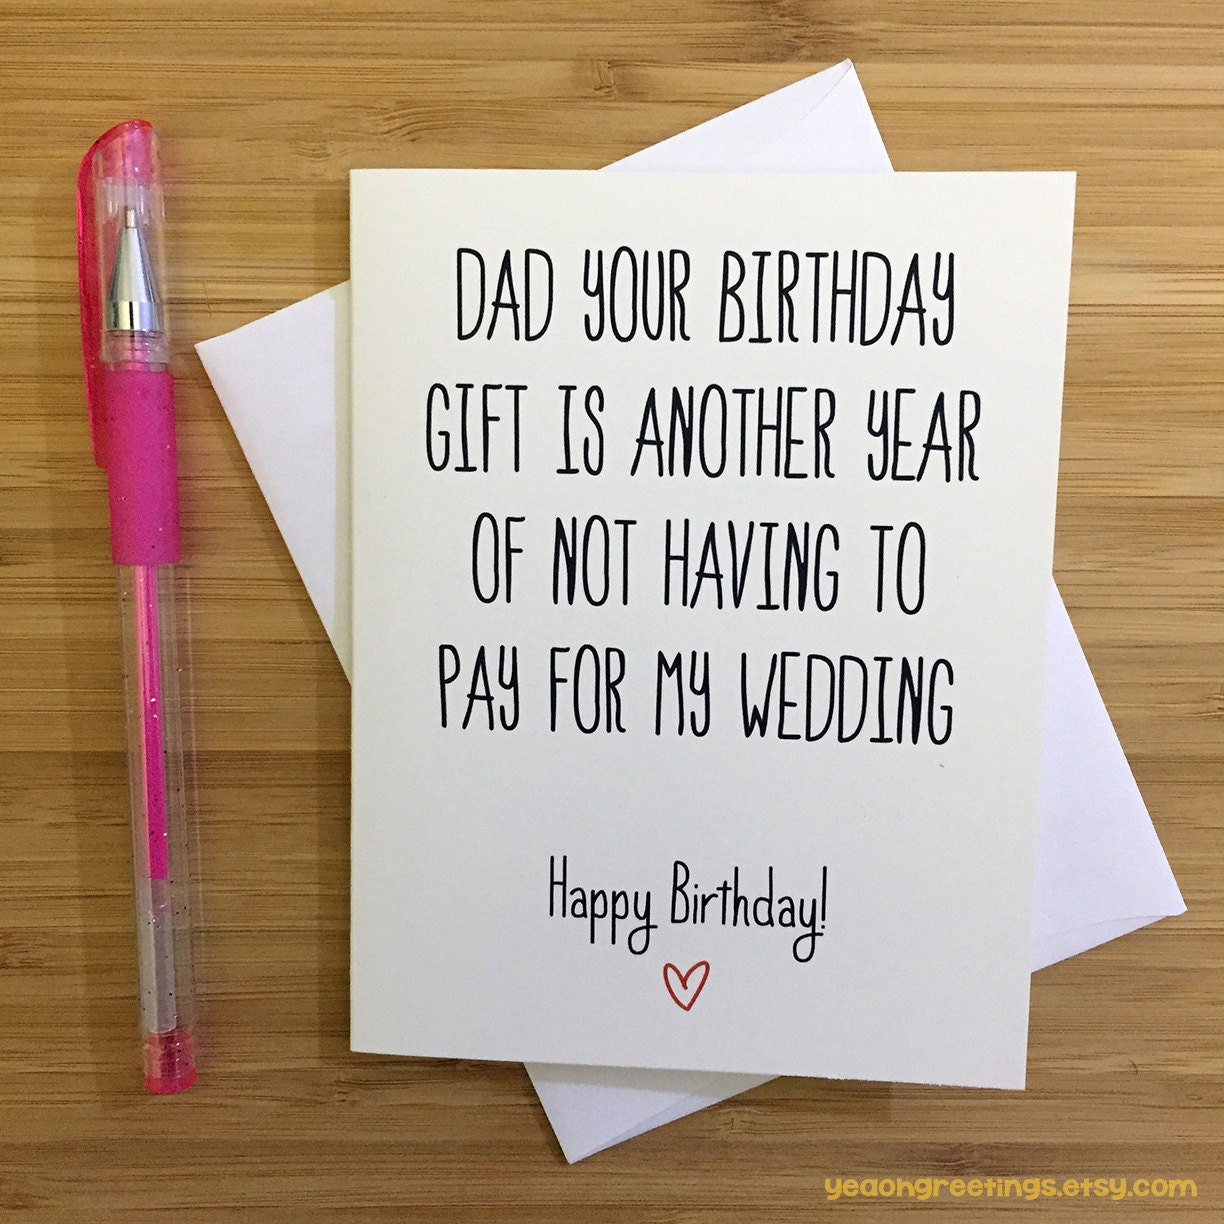 Cards To Make For Your Dad S Birthday